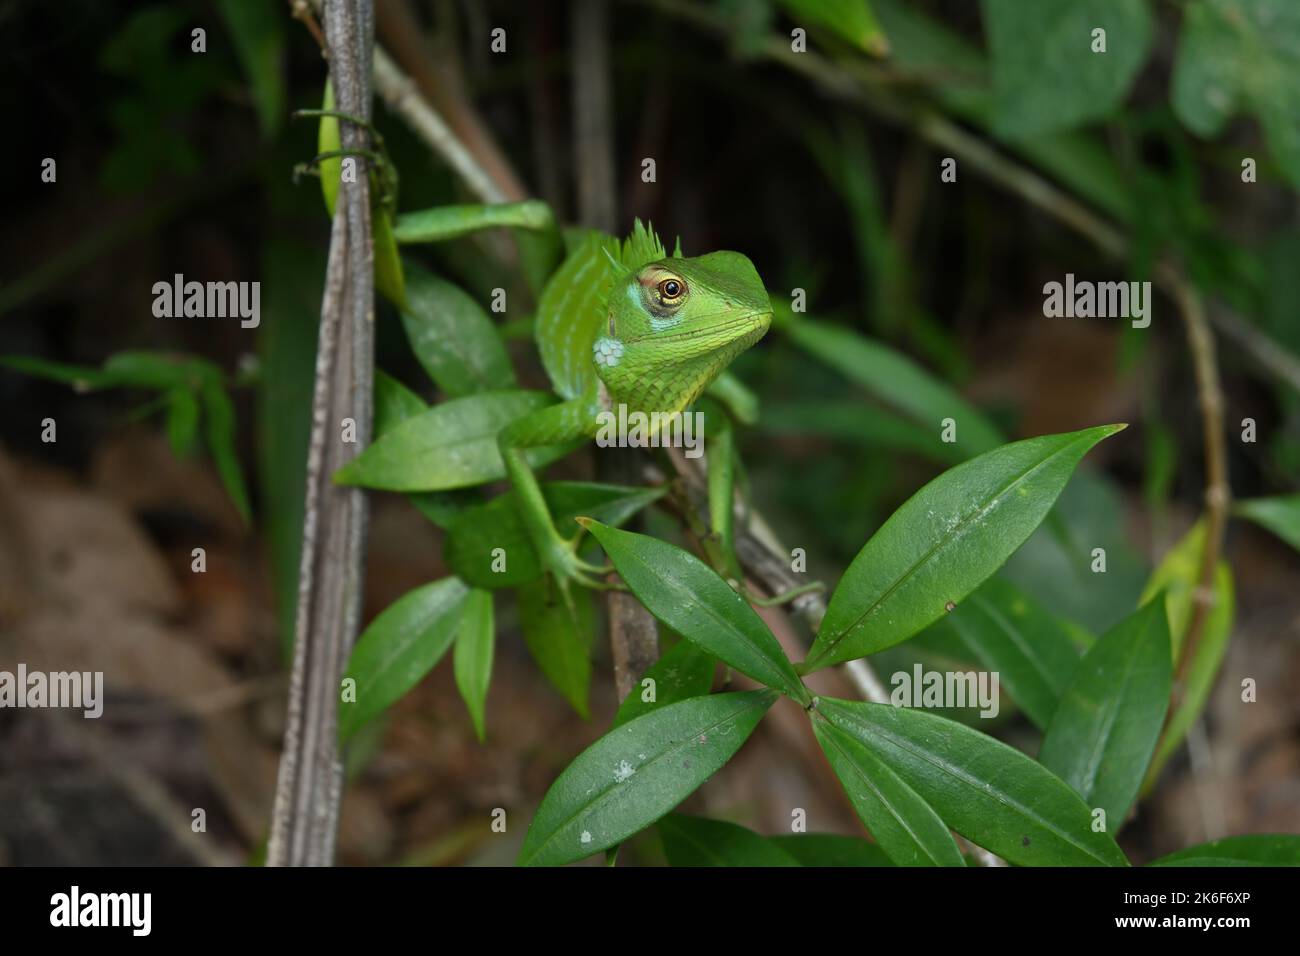 Frontal head view of a green lizard known as the Binomial name of Calotes Calotes, lizard is sitting on top of a common trumpet vine Stock Photo